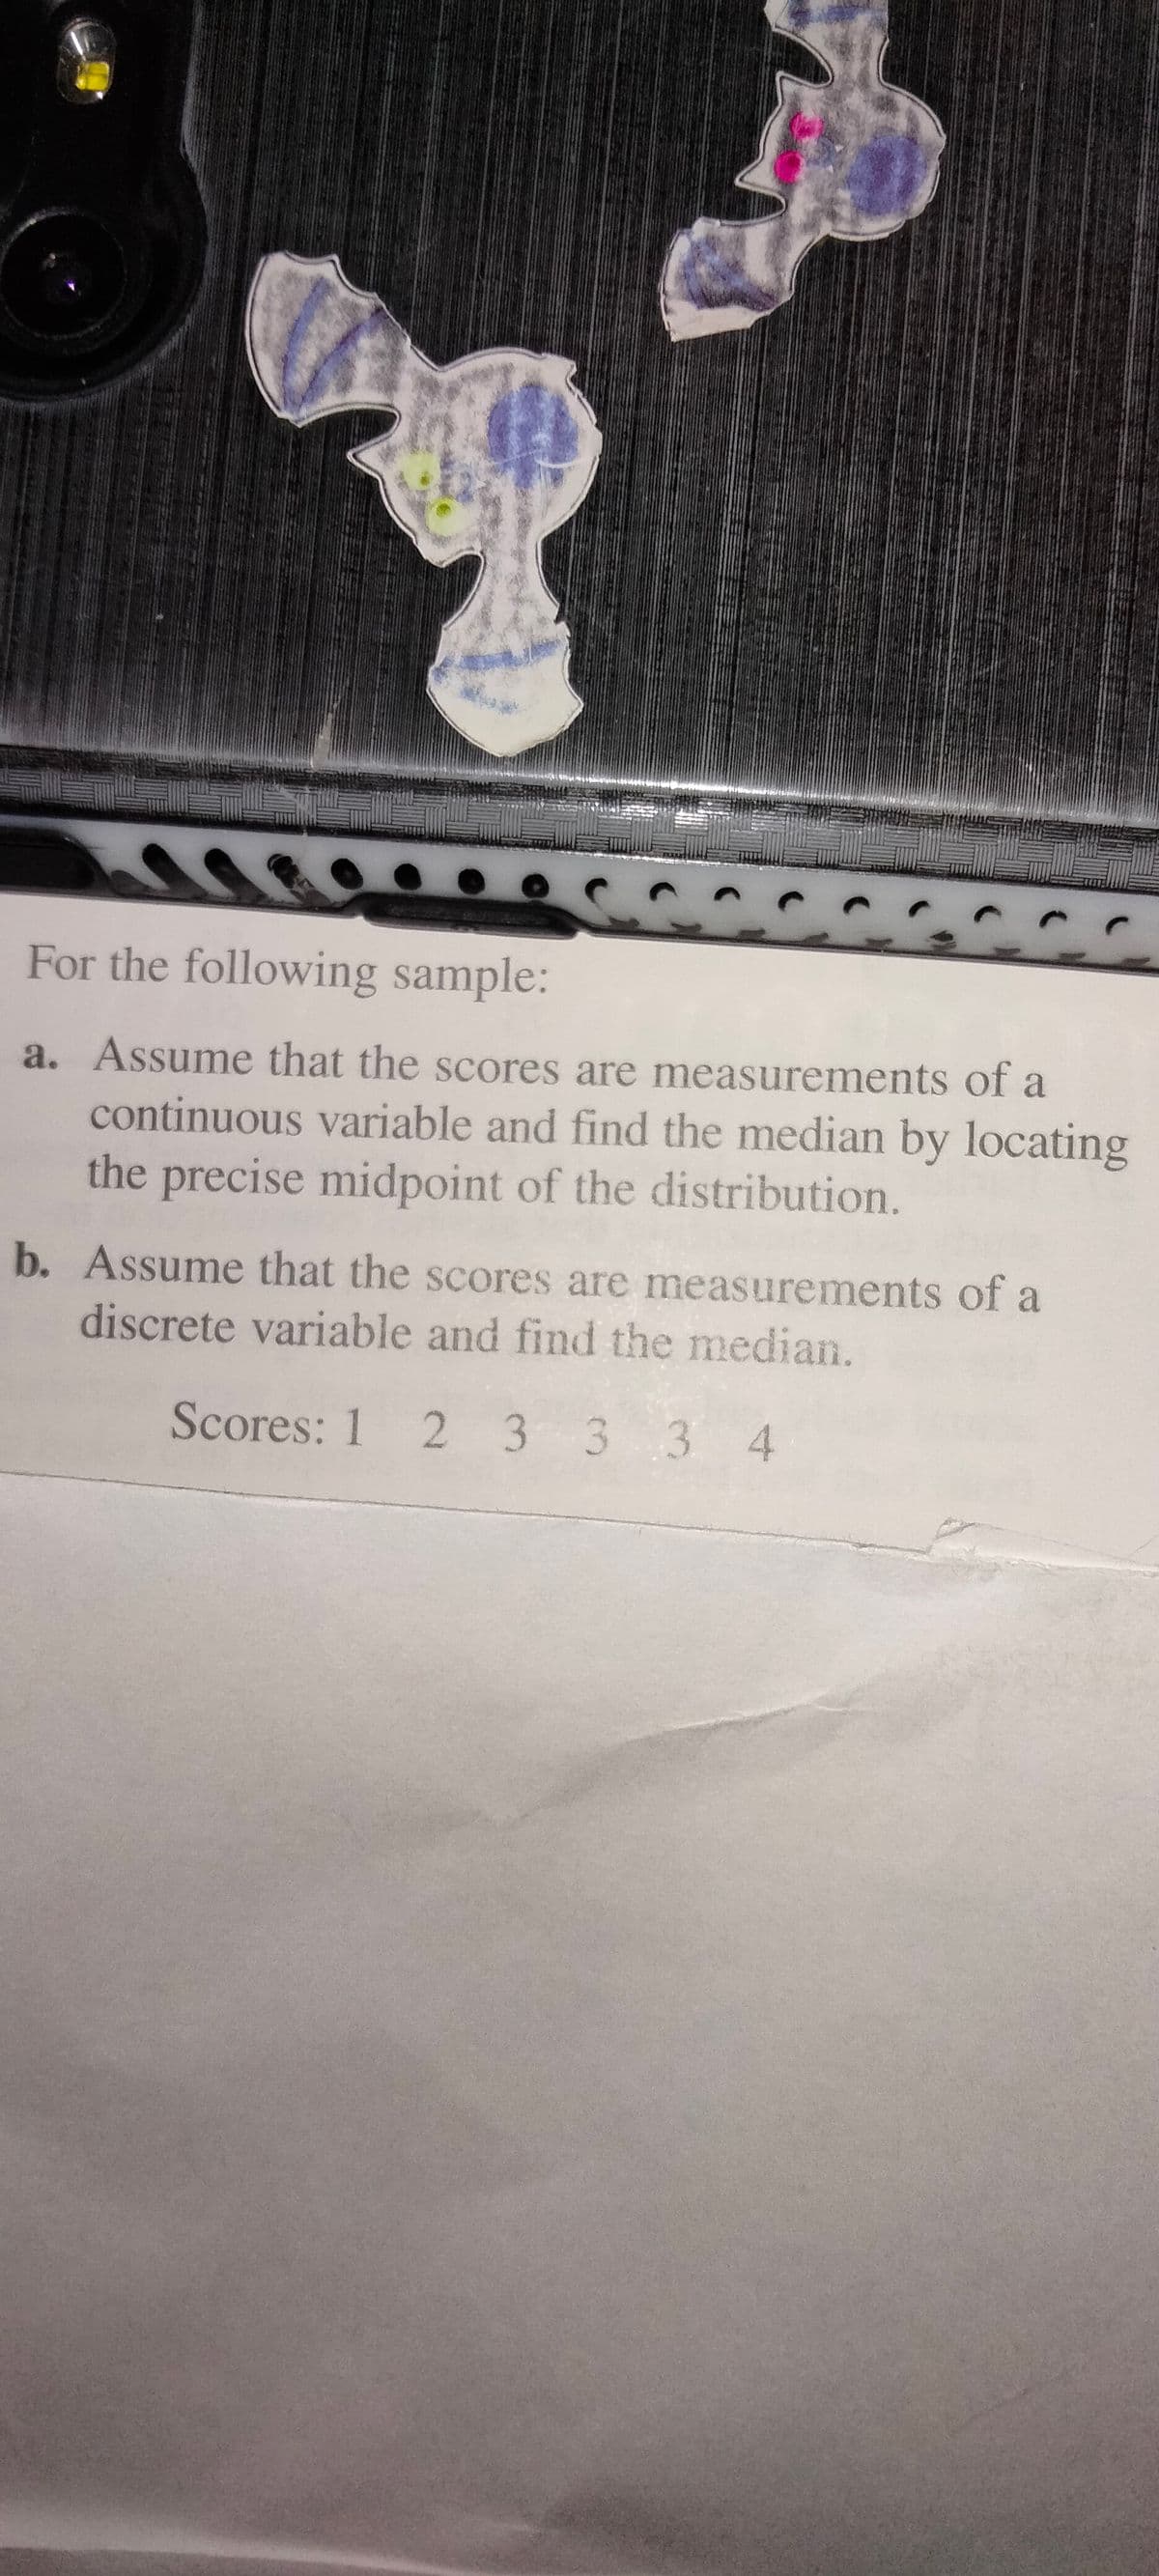 For the following sample:
a. Assume that the scores are measurements of a
continuous variable and find the median by locating
the precise midpoint of the distribution.
b. Assume that the scores are measurements of a
discrete variable and find the median.
Scores: 1 2 3 3 3 4
